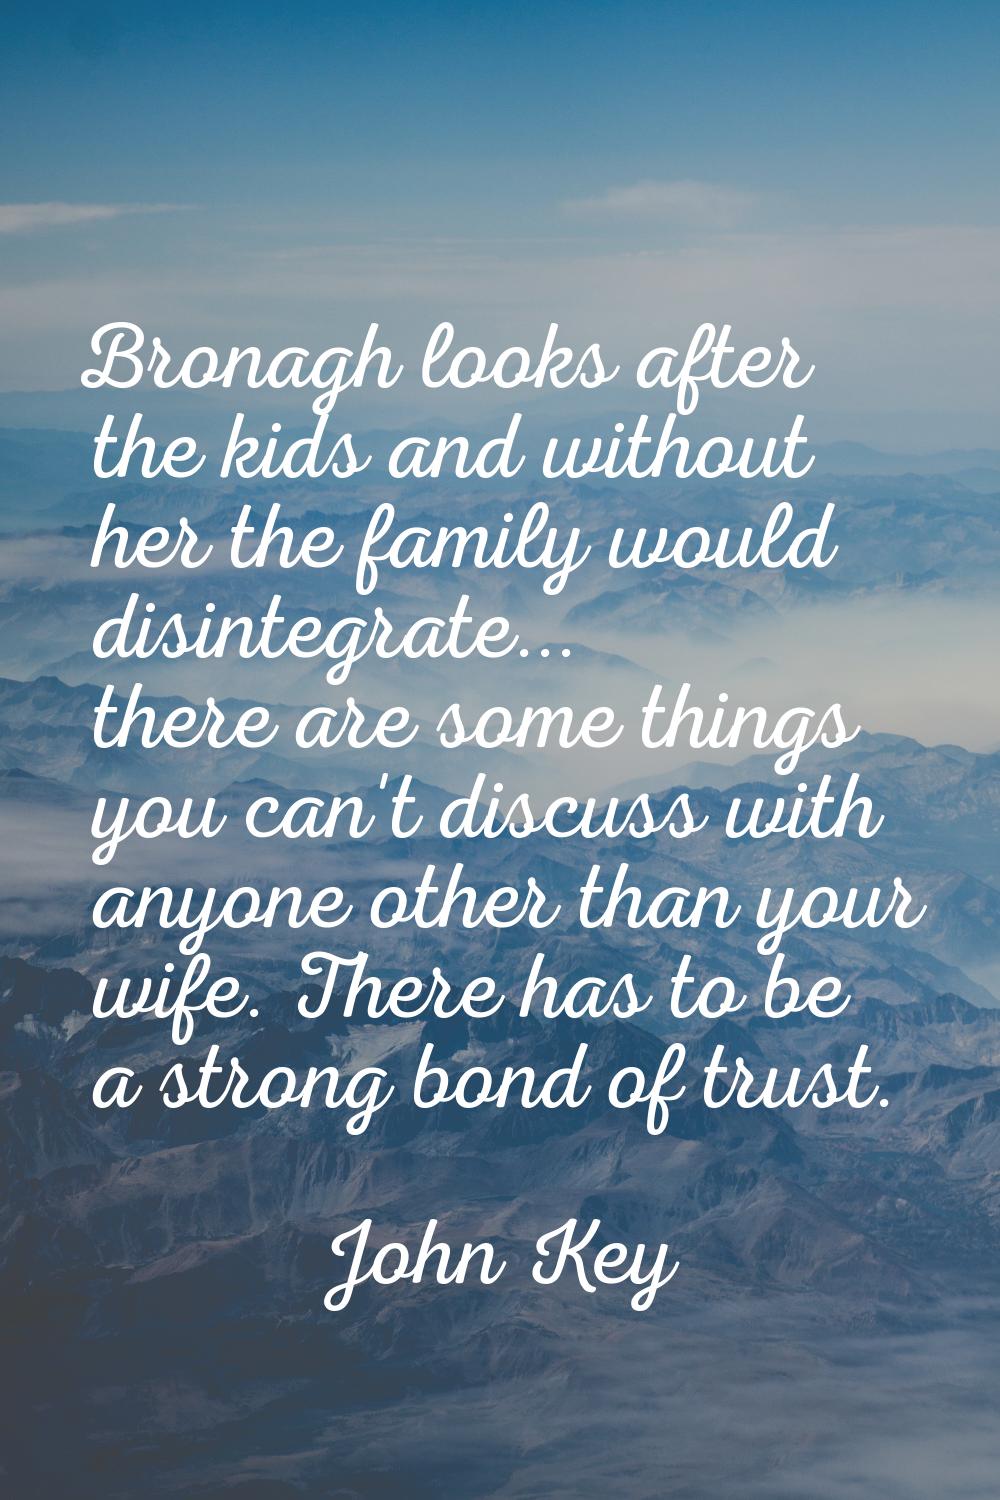 Bronagh looks after the kids and without her the family would disintegrate... there are some things